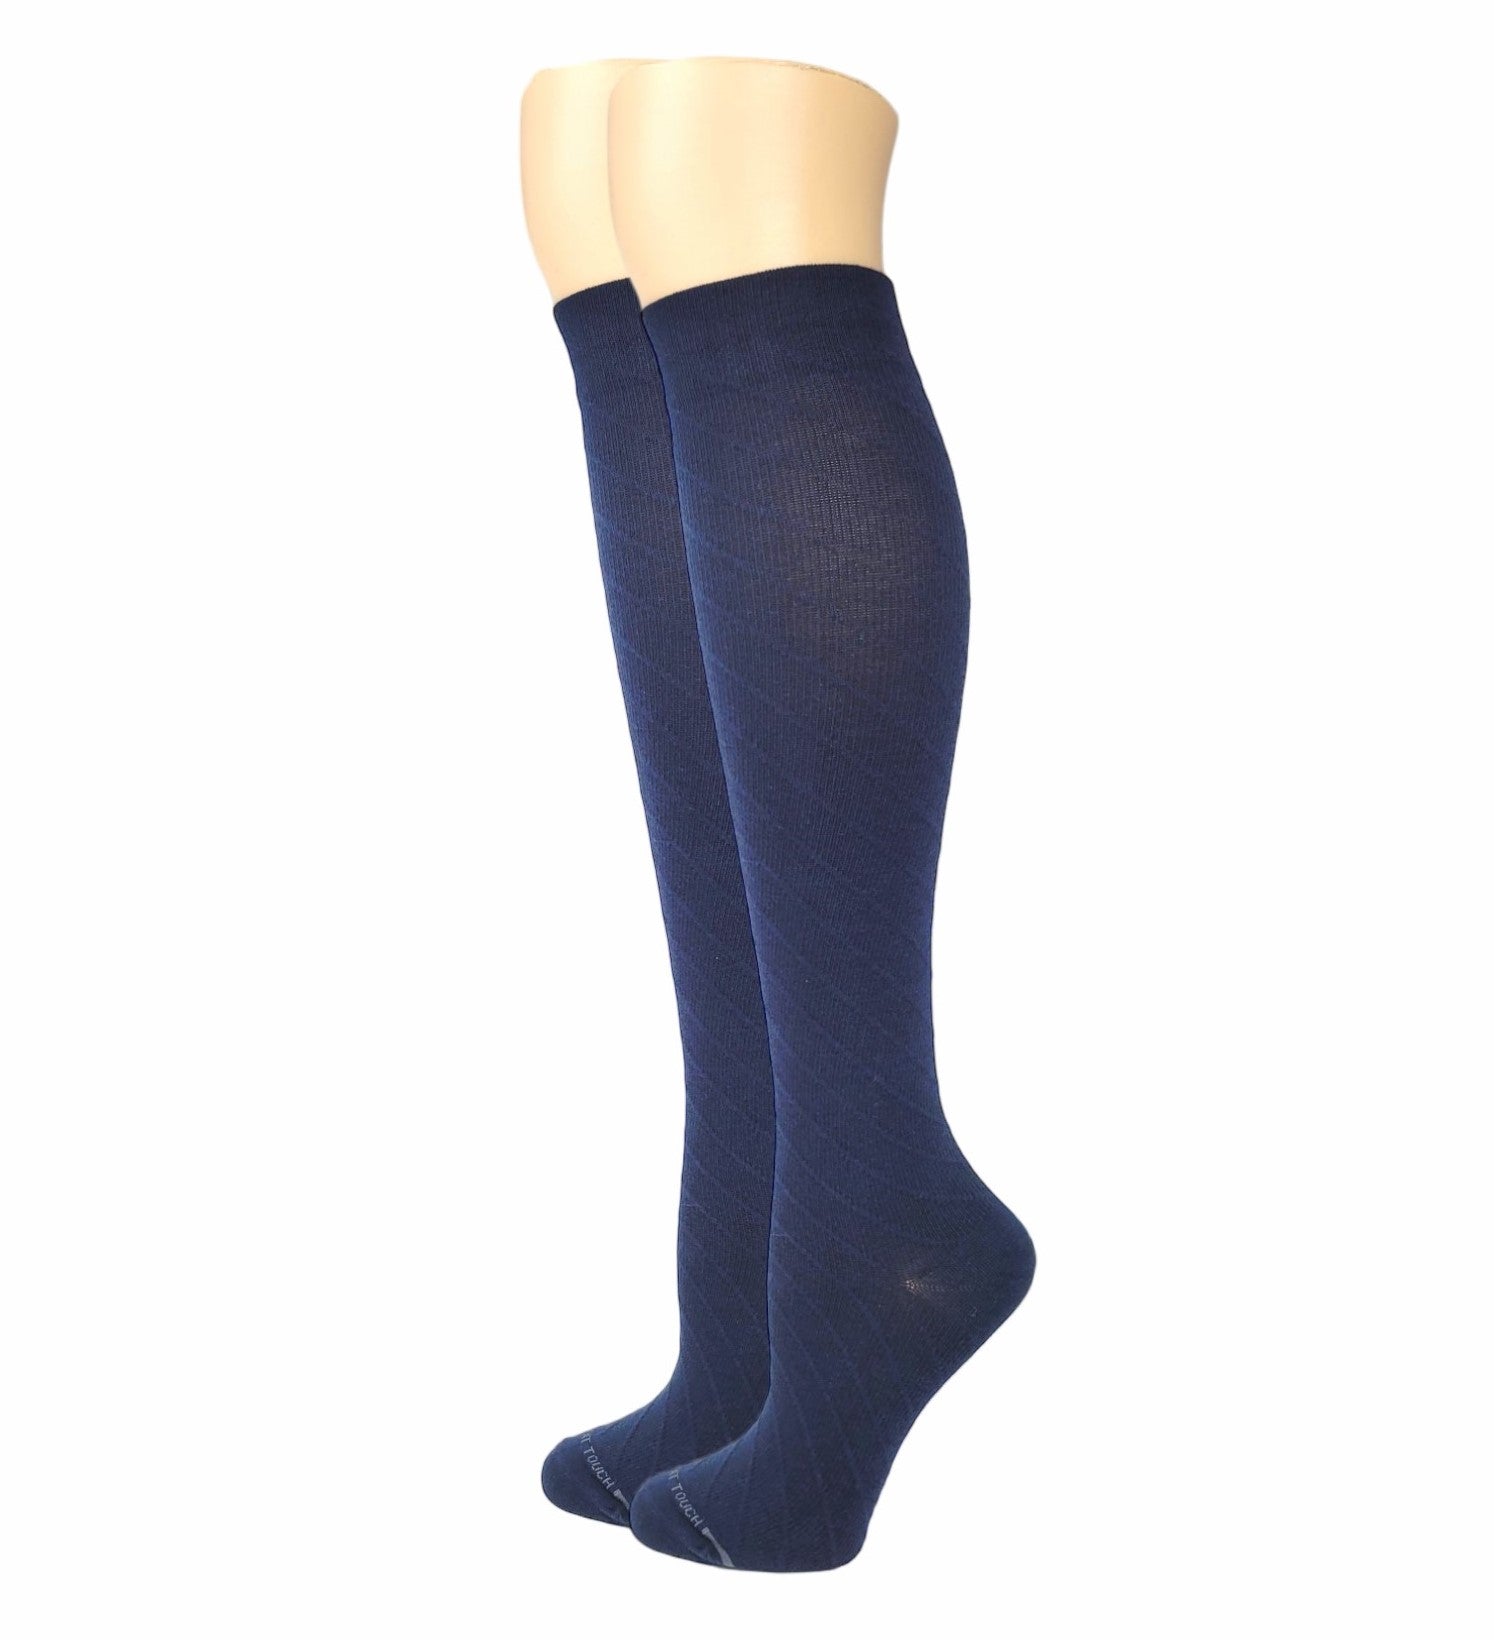 Compression Knee High Socks | 15-20 mmHg Cotton Blend Solid Color | Women (1pair)